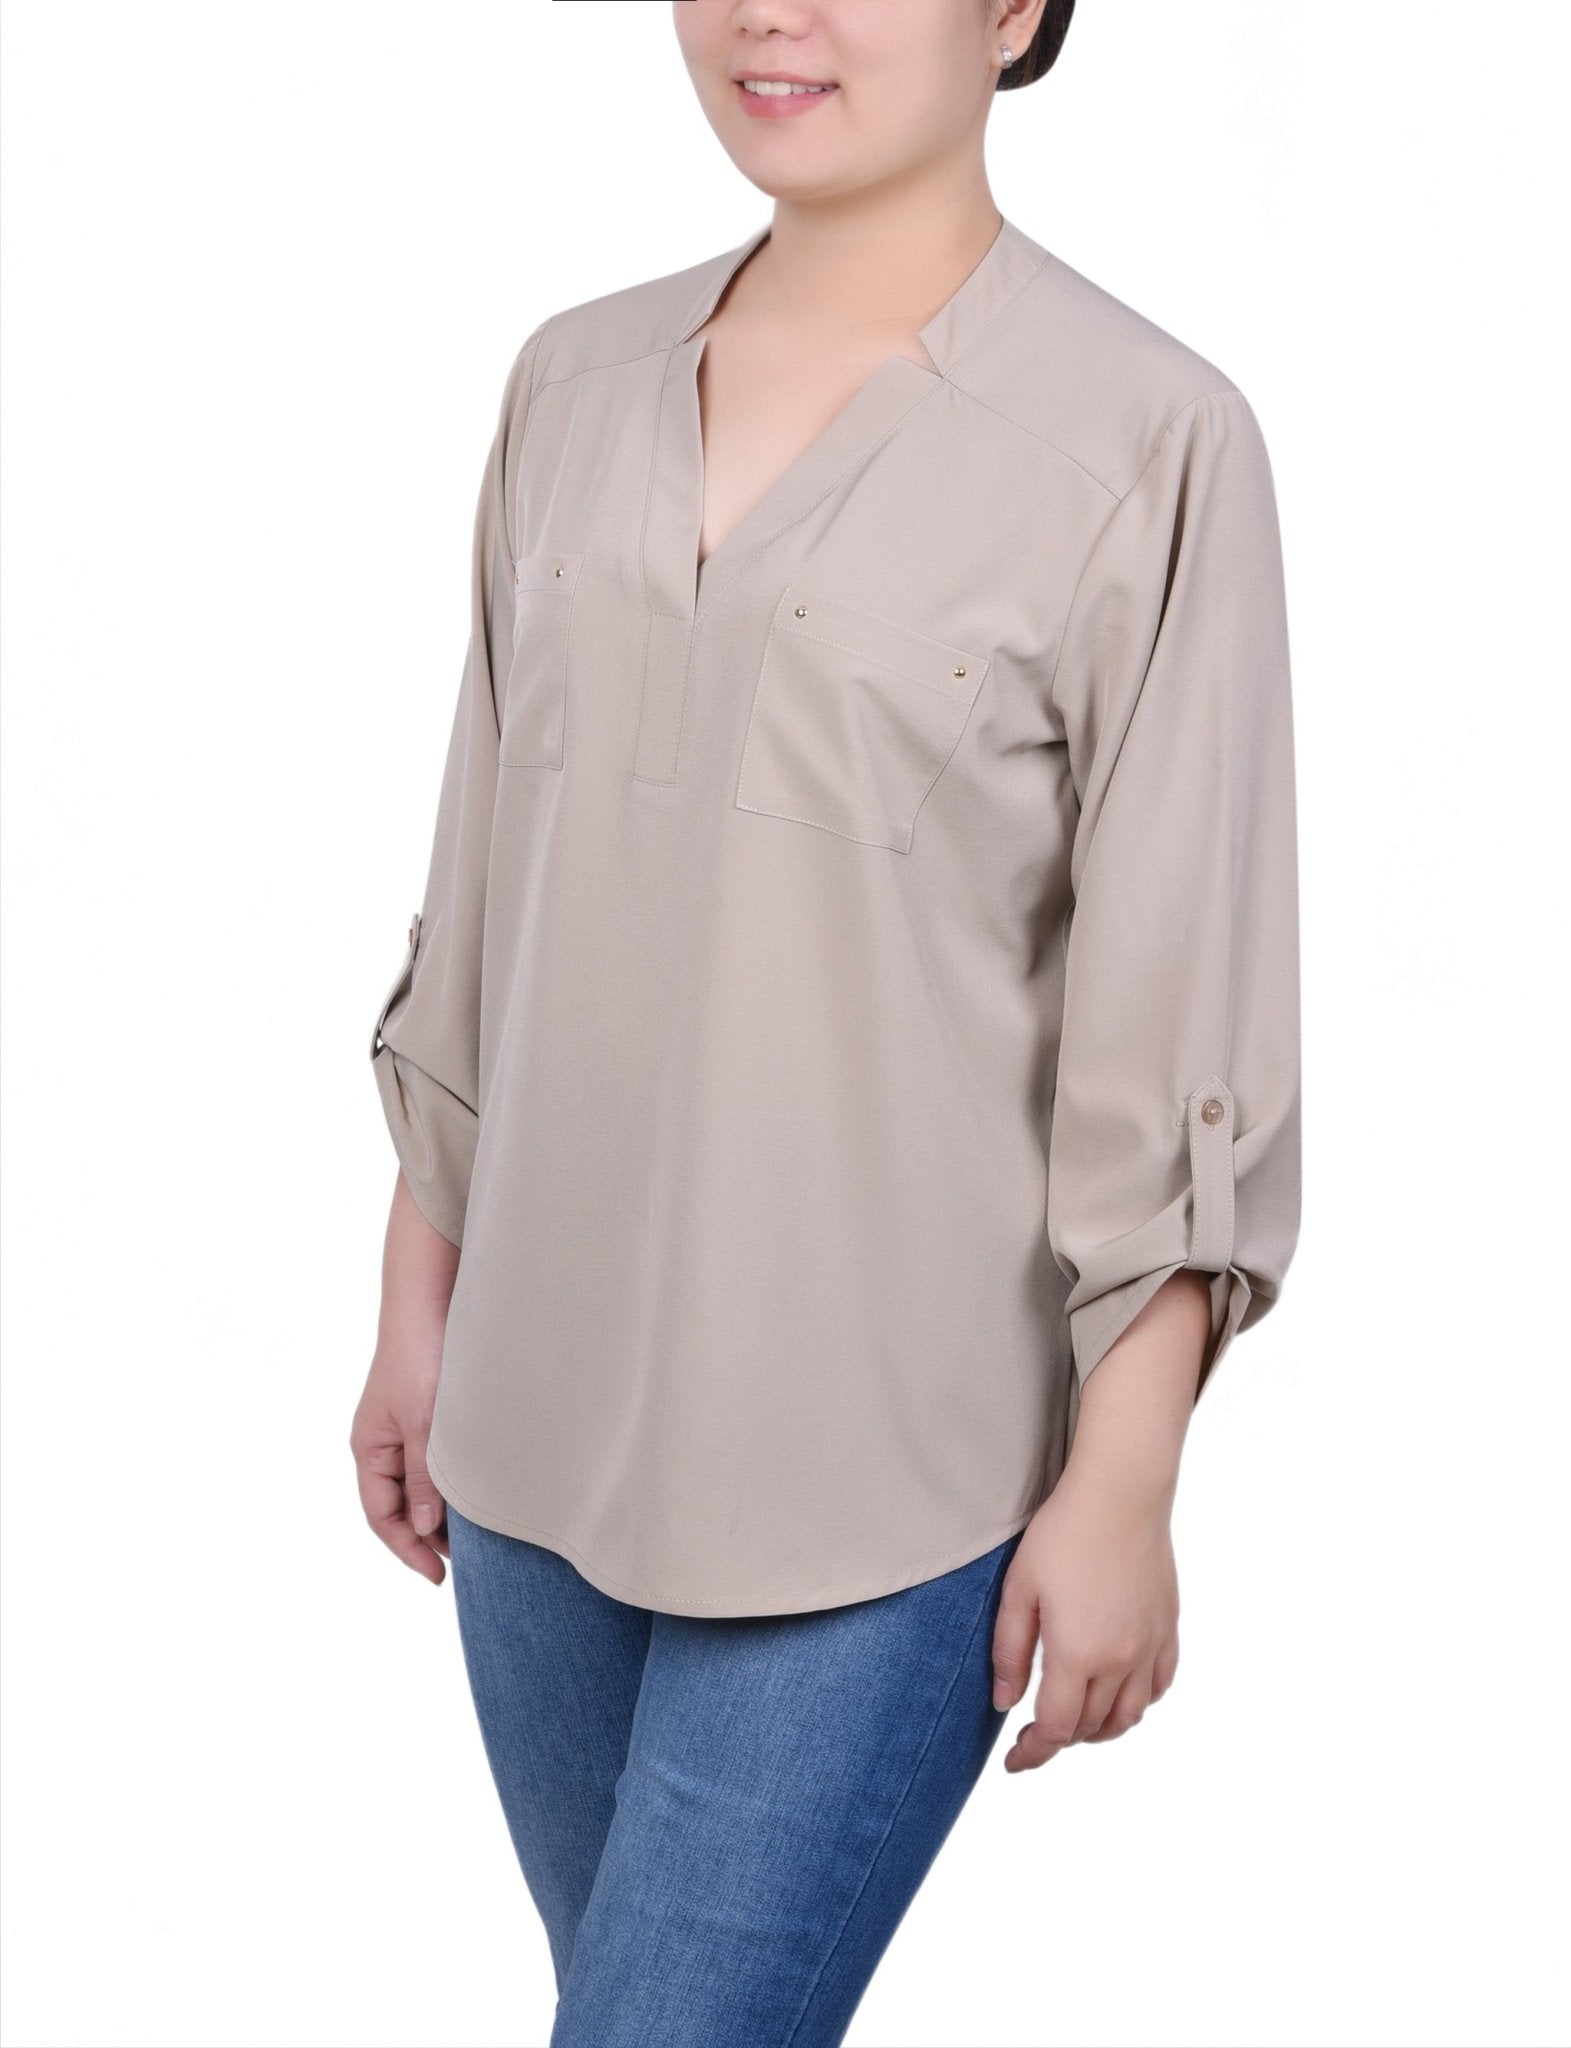 Roll Tab Sleeve Blouse with Pockets - Petite - DressbarnShirts & Blouses